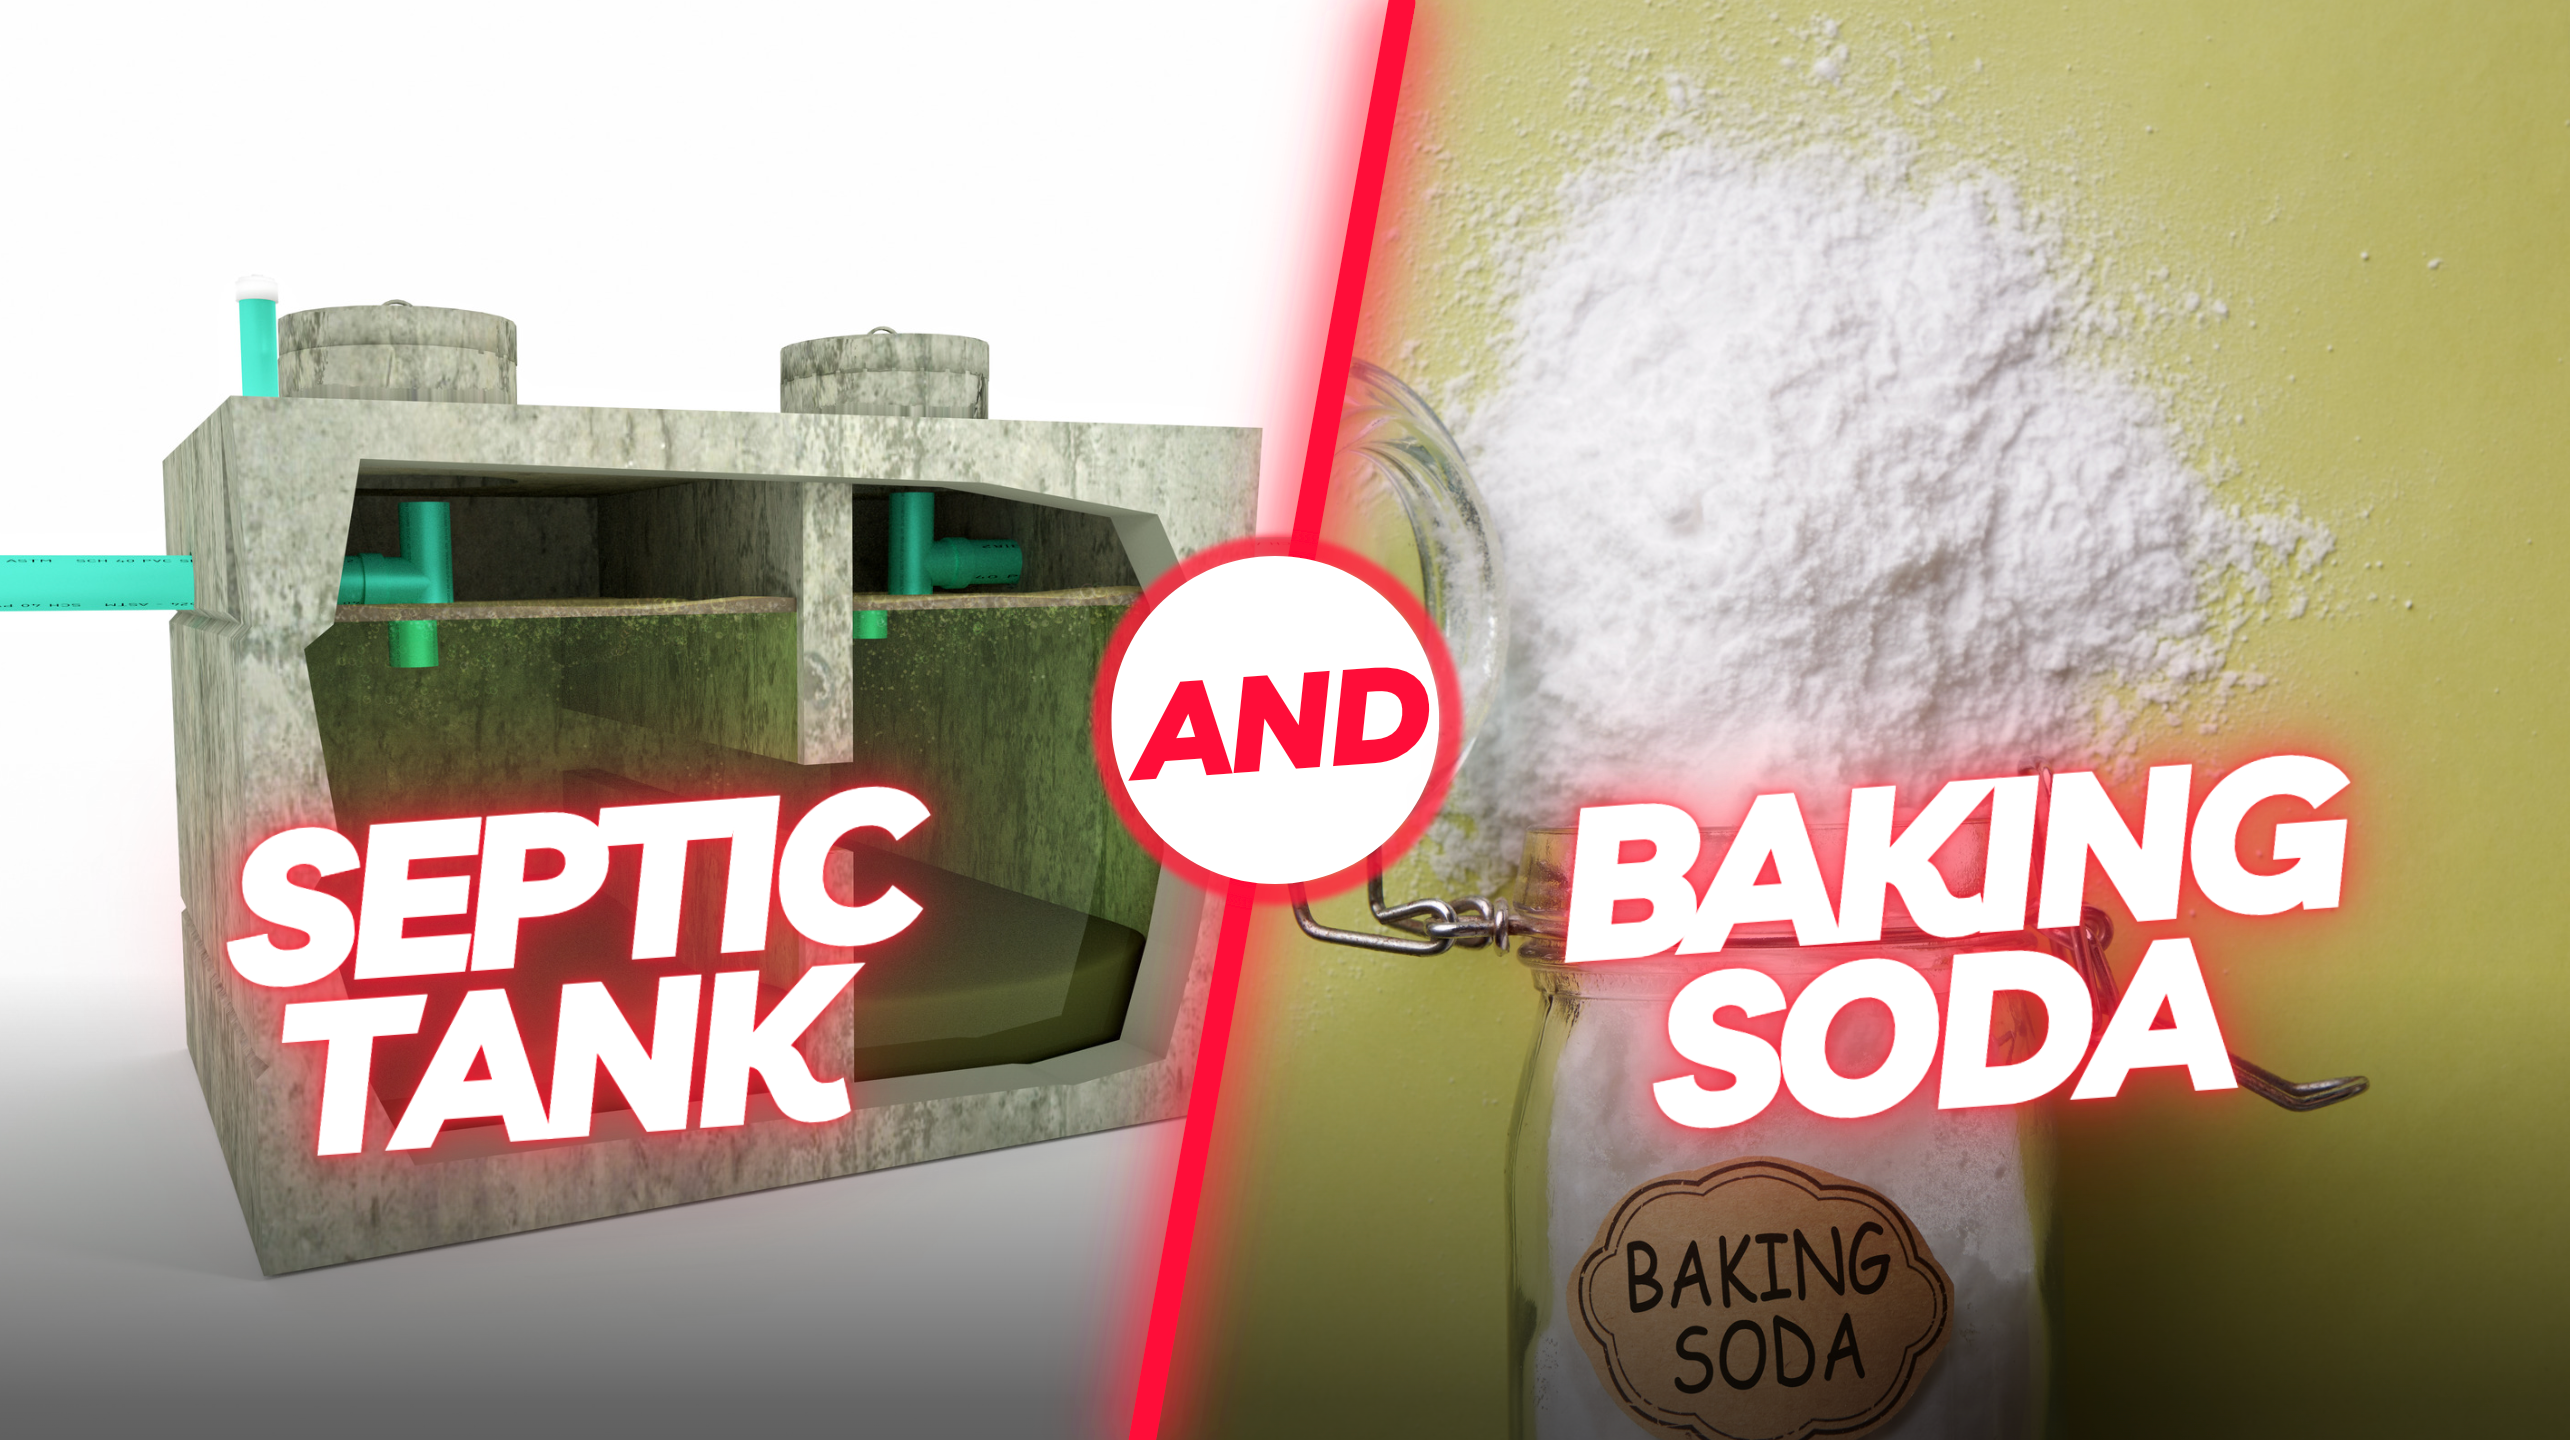 Is Baking Soda Good for Septic Tanks?